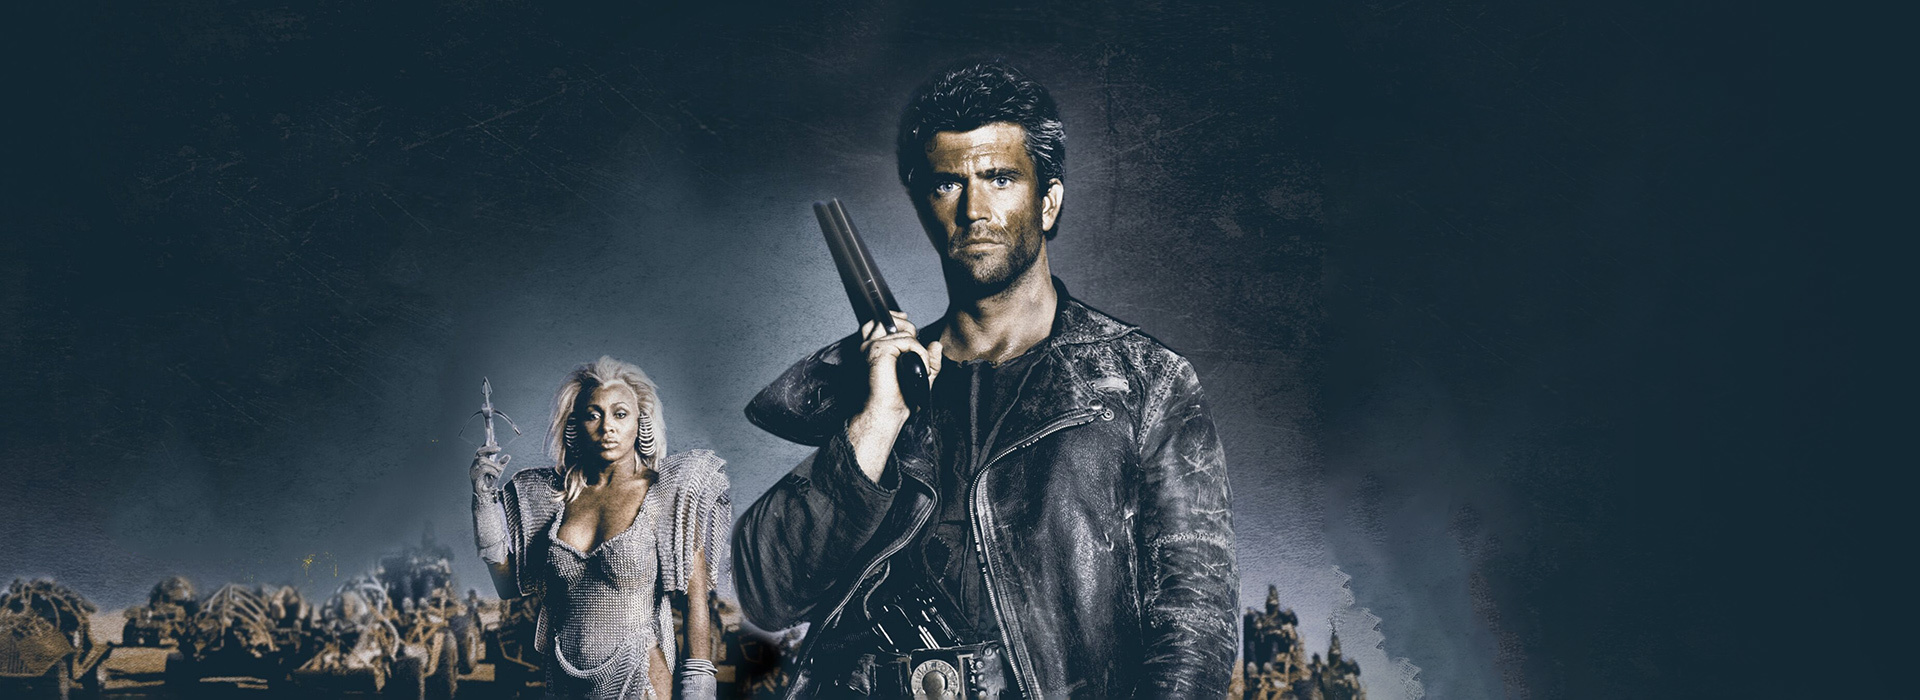 Movie poster Mad Max Beyond Thunderdome